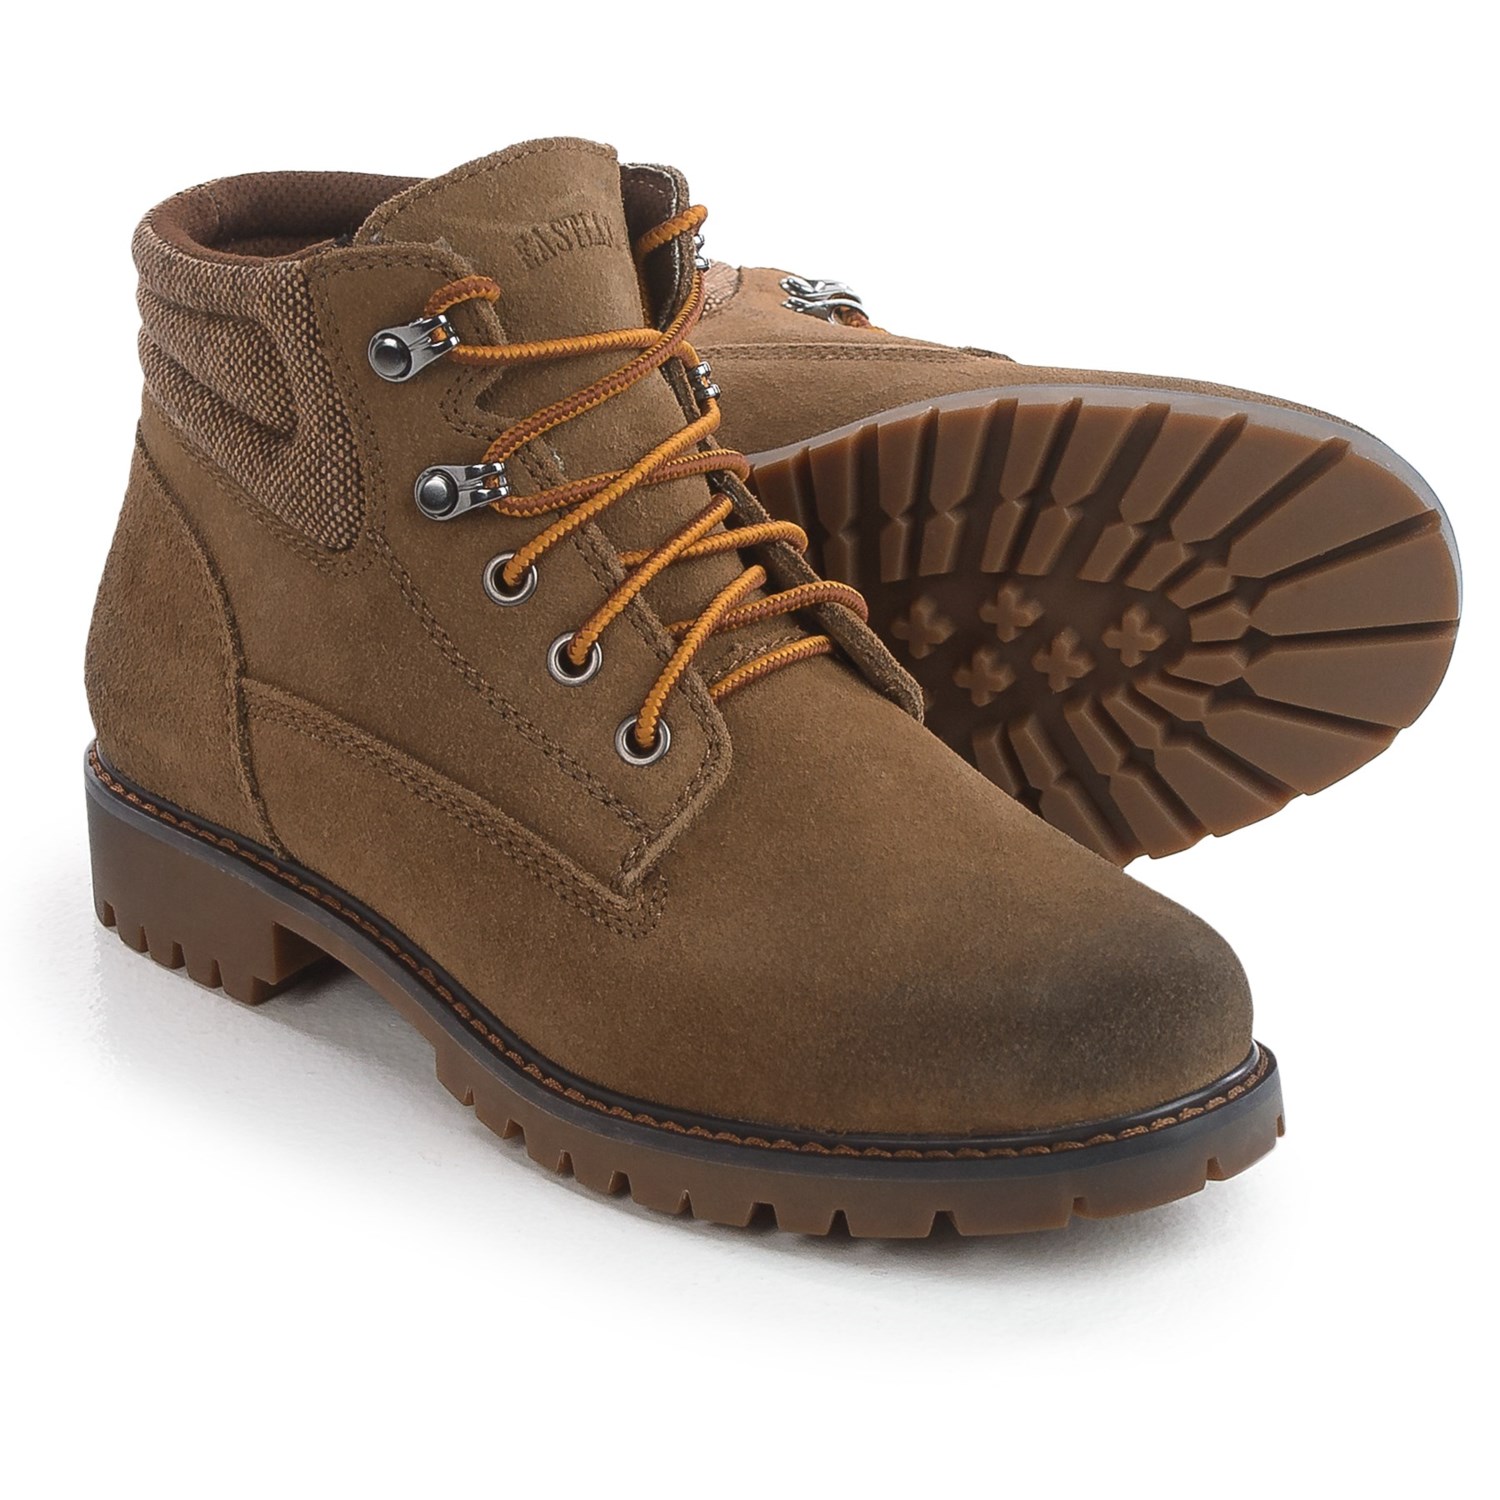 Eastland Edith Boots (For Women) - Save 63%